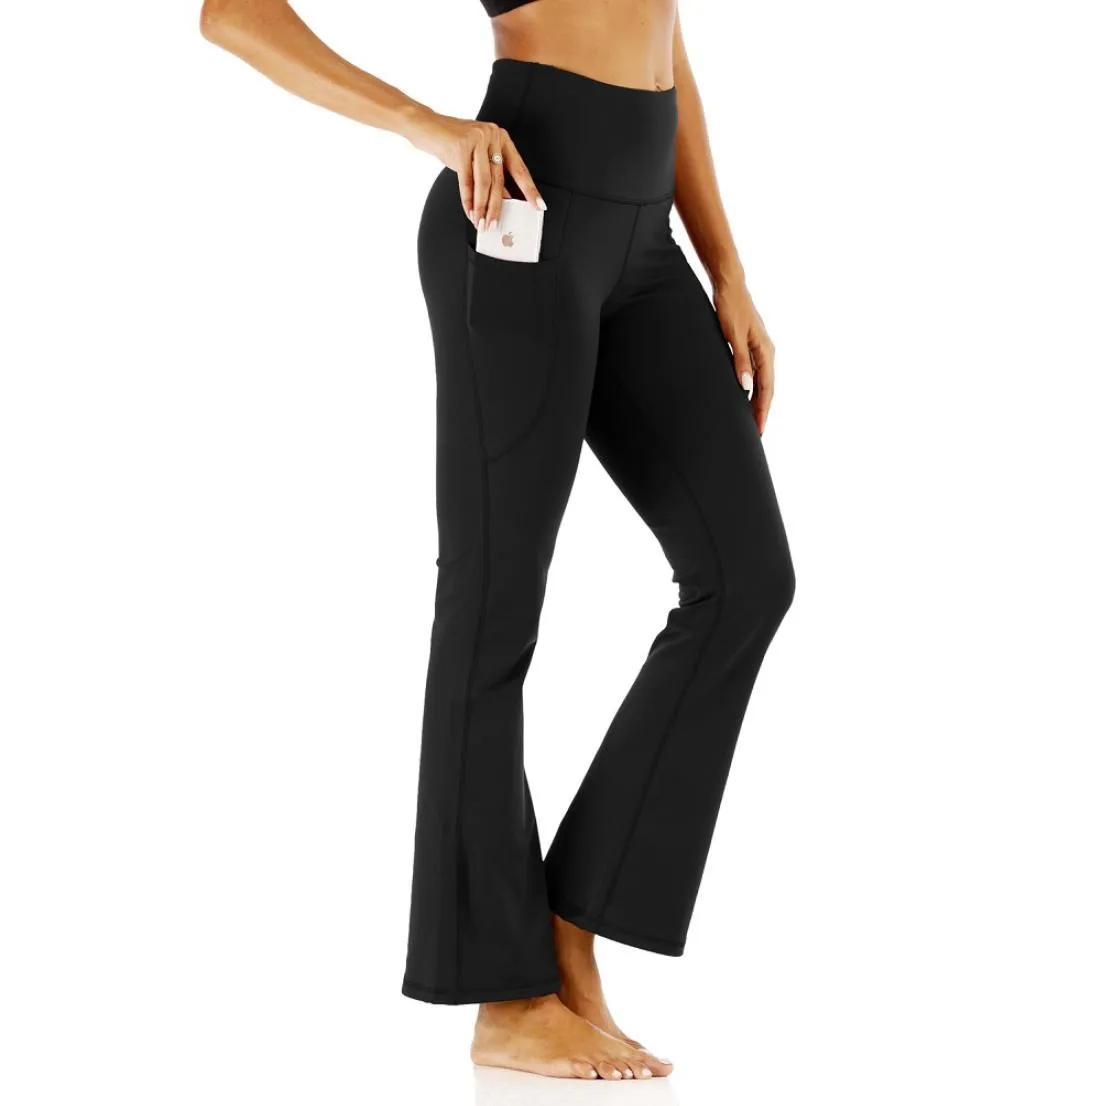 Bootcut Yoga Pants For Women Tummy Control Bootleg Leggings With  Pockets1179996 From Xuqa, $18.79